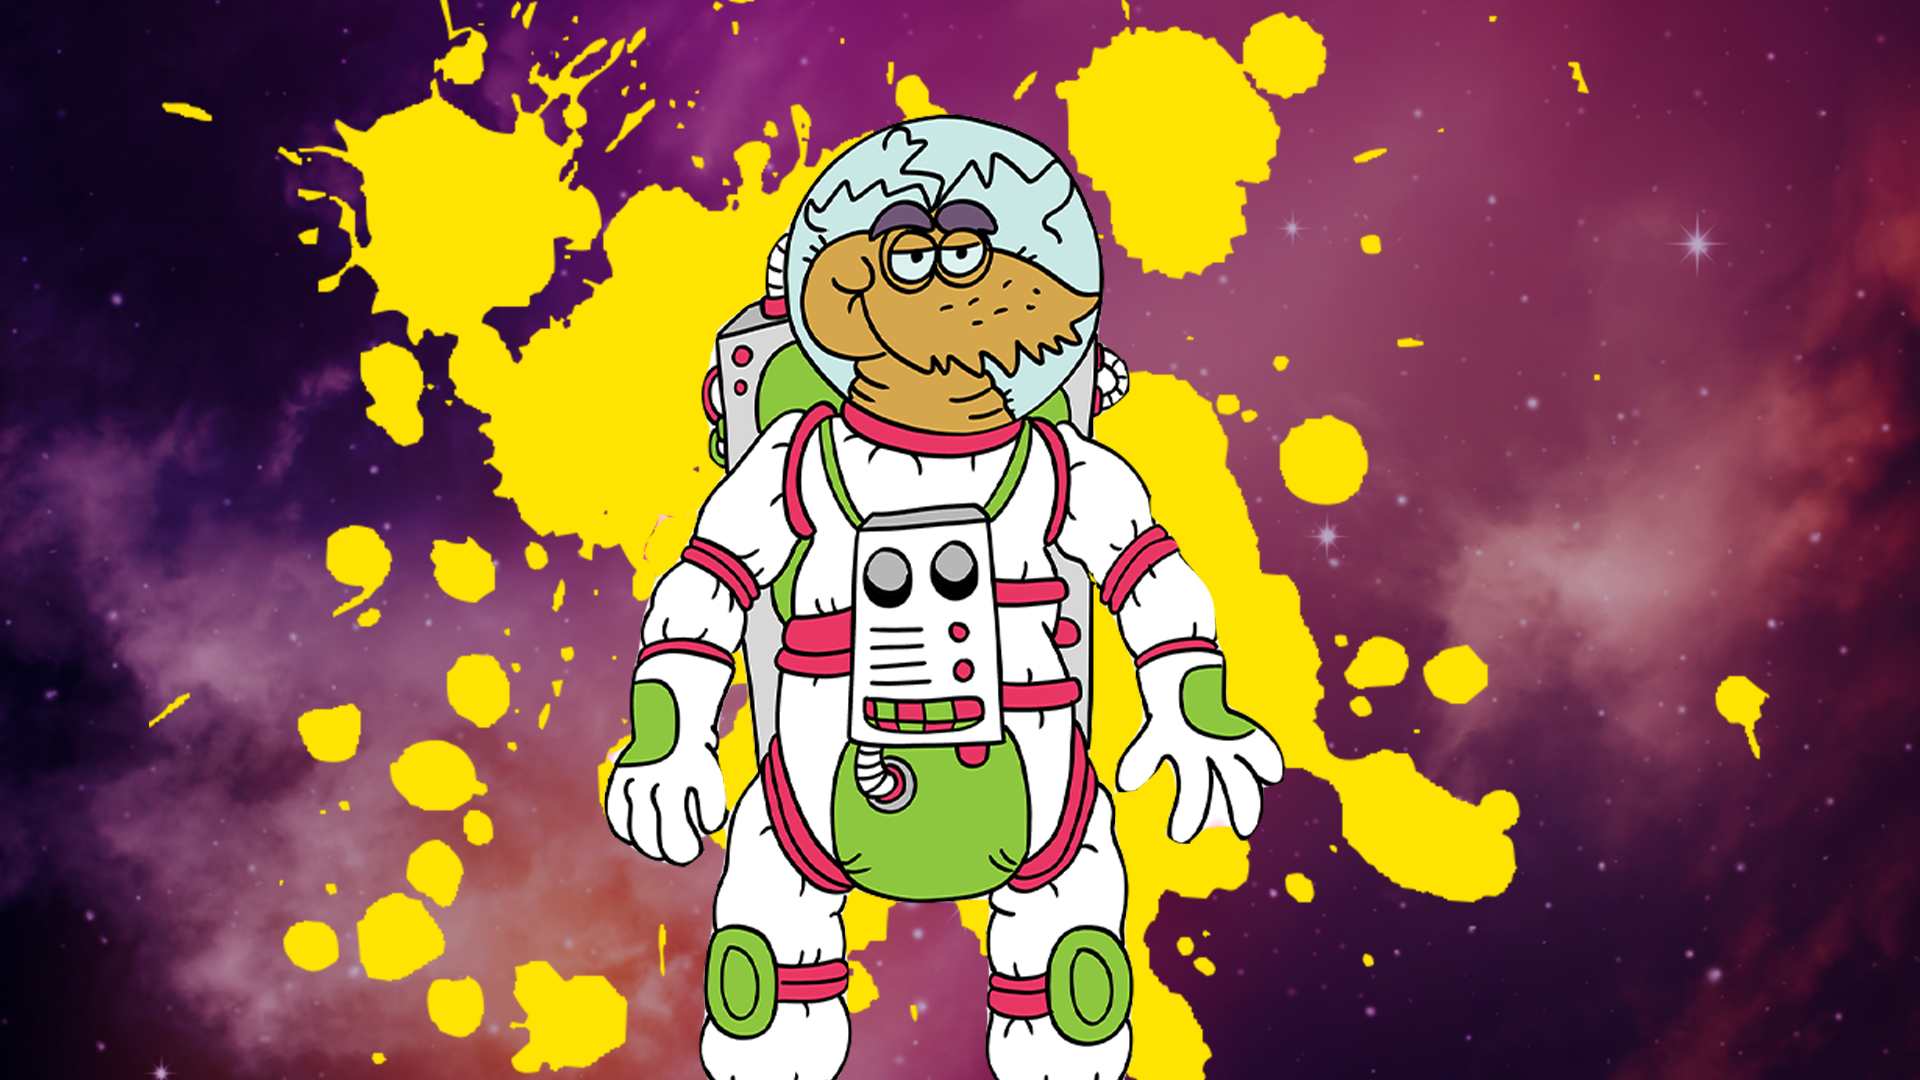 Flea in space with yellow splat 